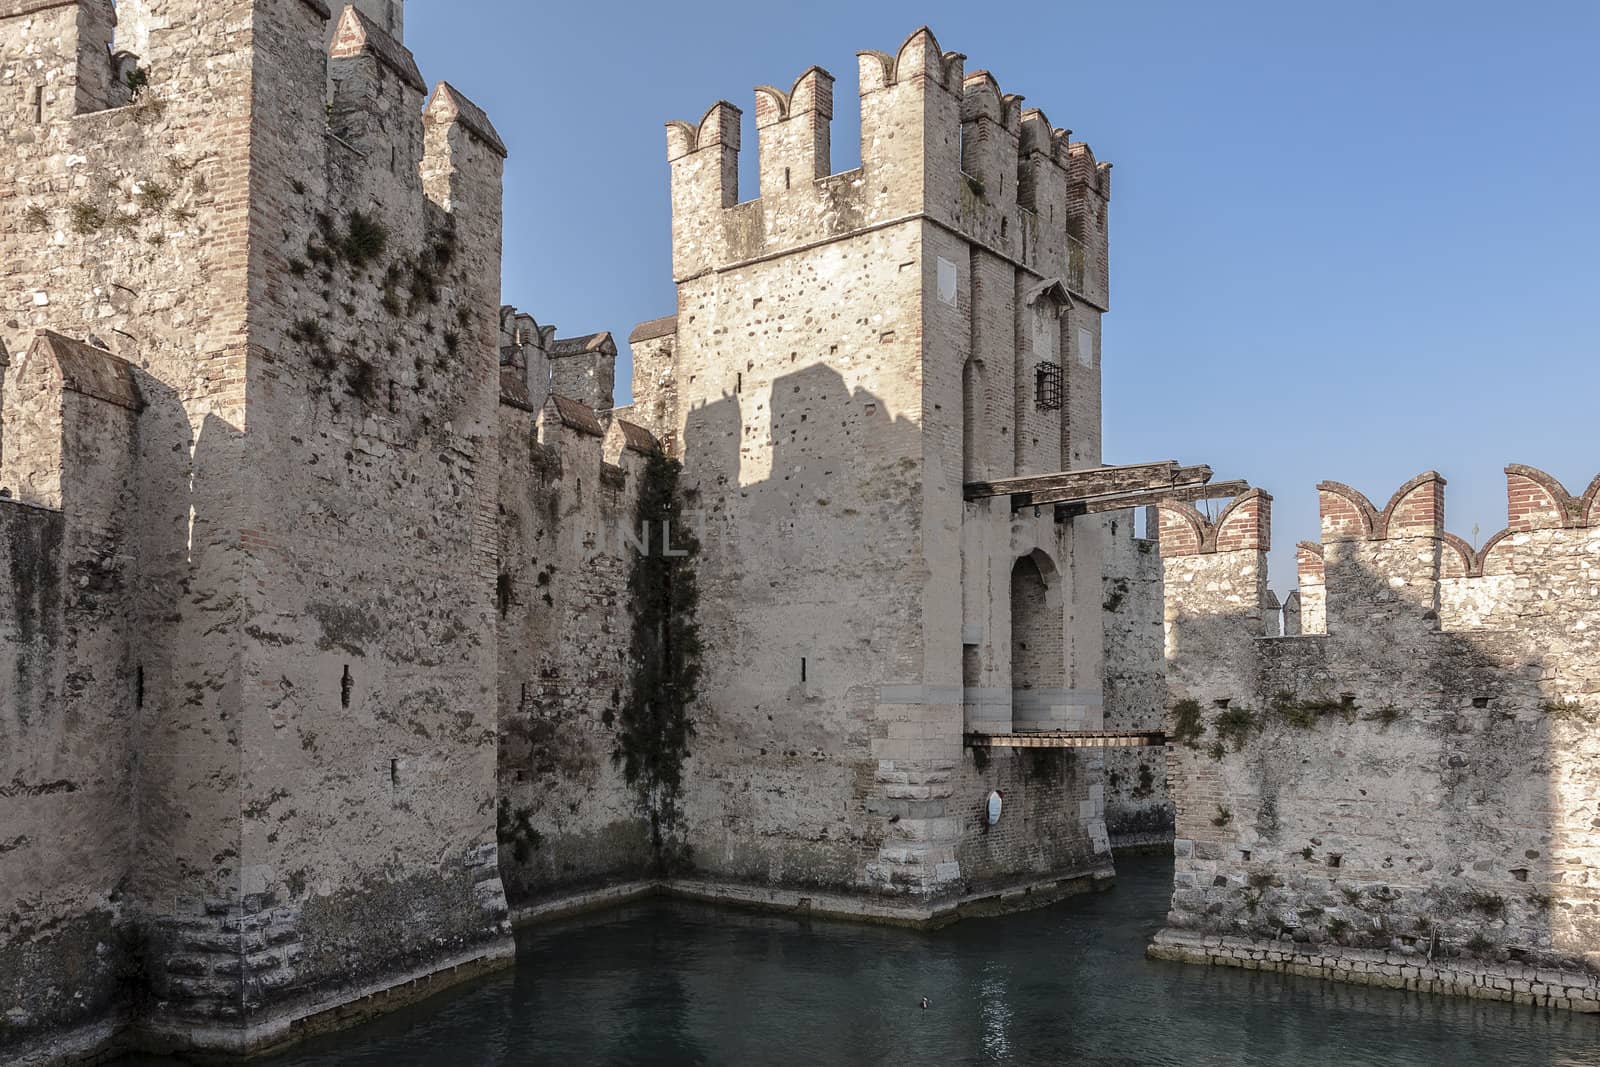 The Scaliger Castle, Sirmione, Italy